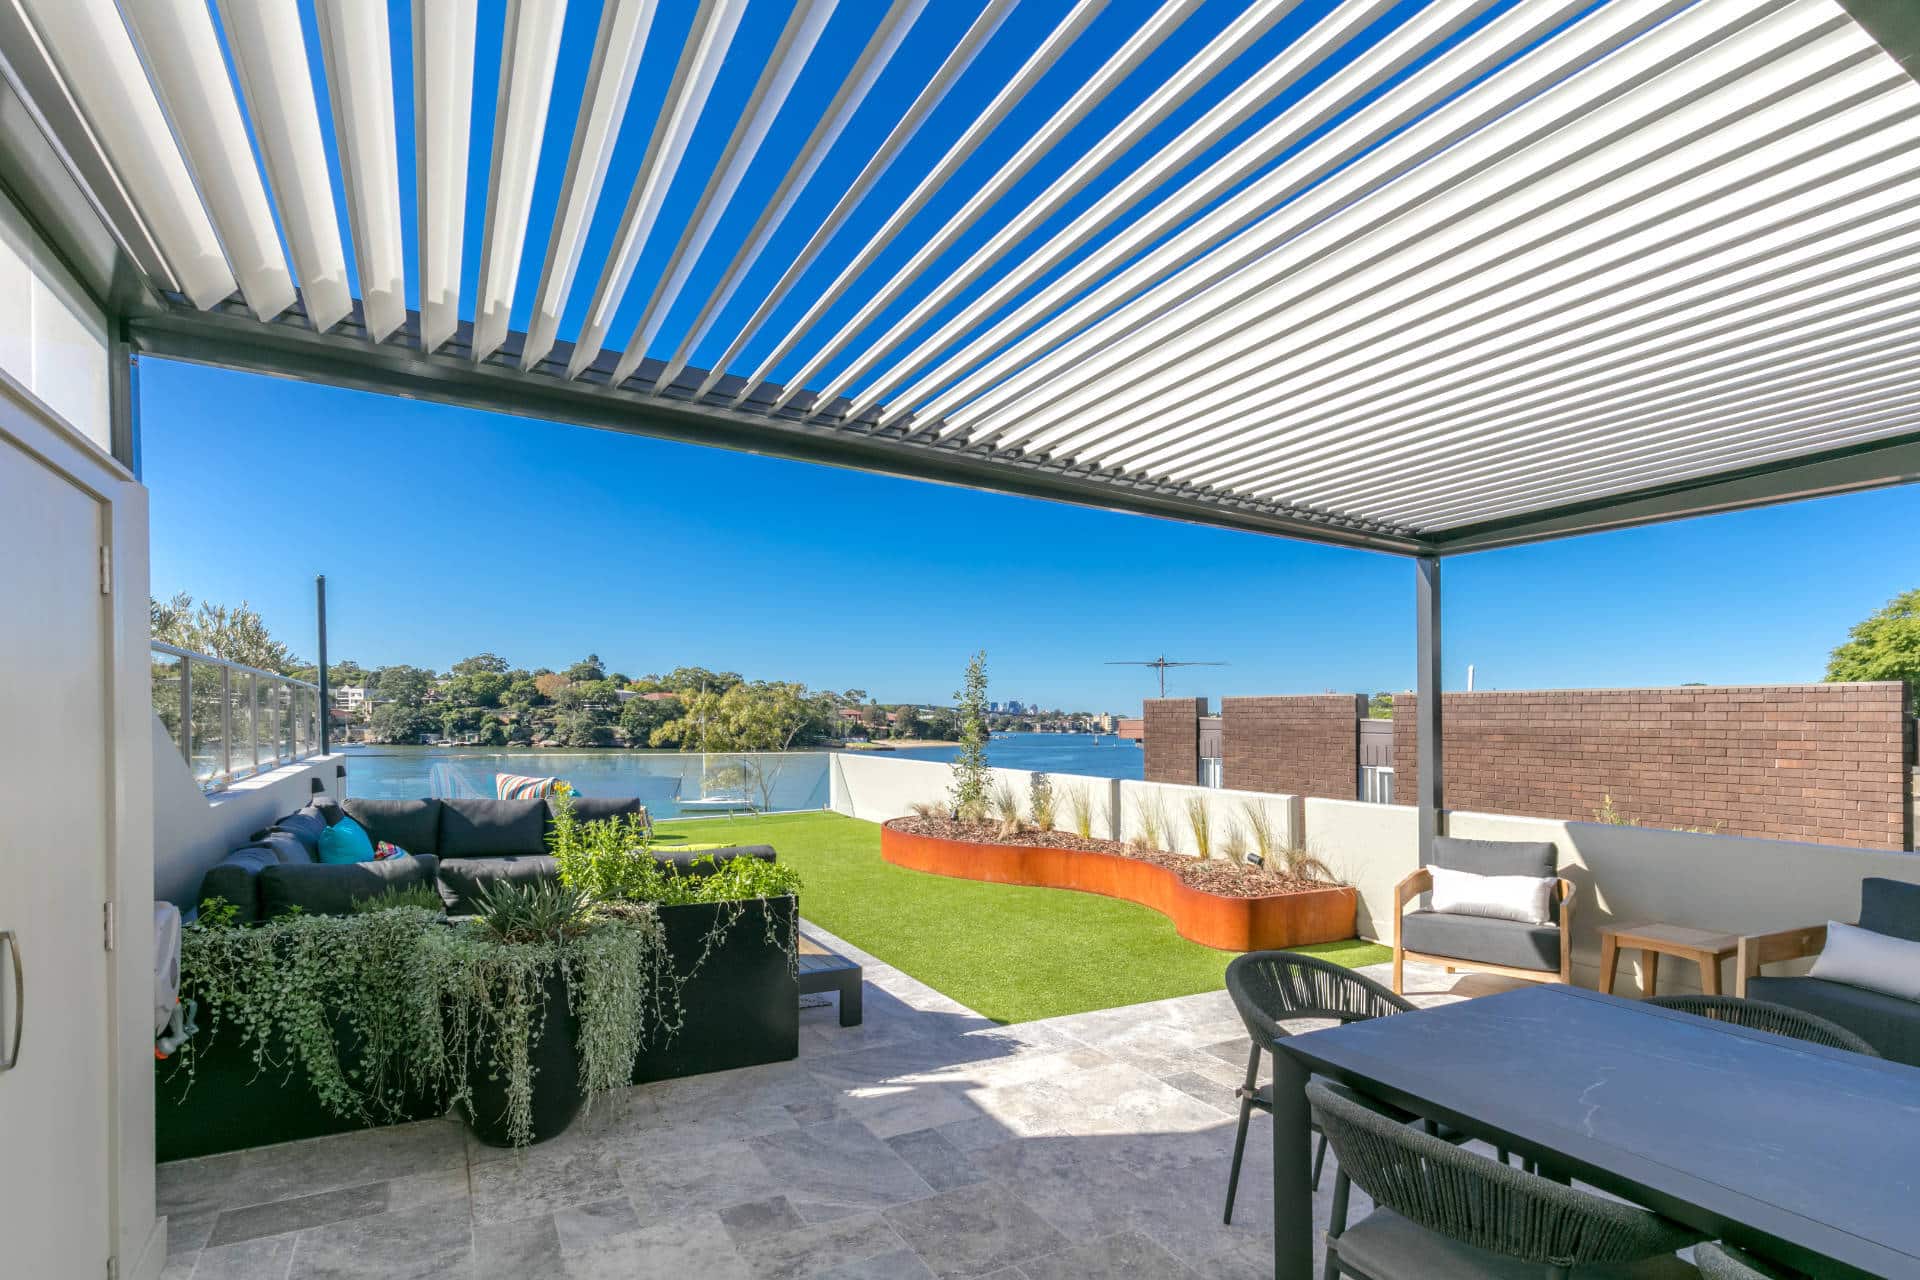 Open louvres on the Abbotsford pergola.